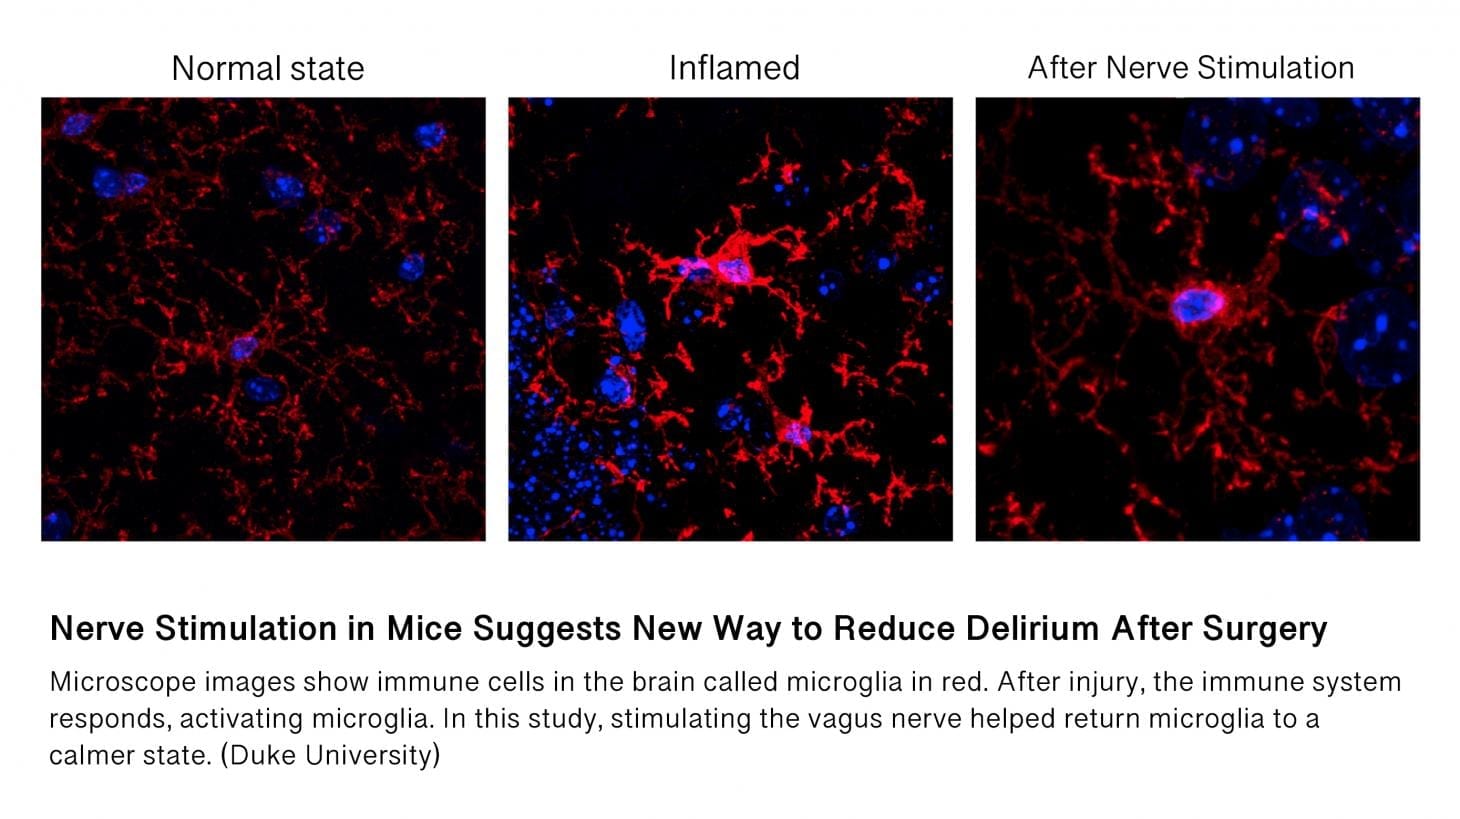 A new way to reduce delirium after surgery